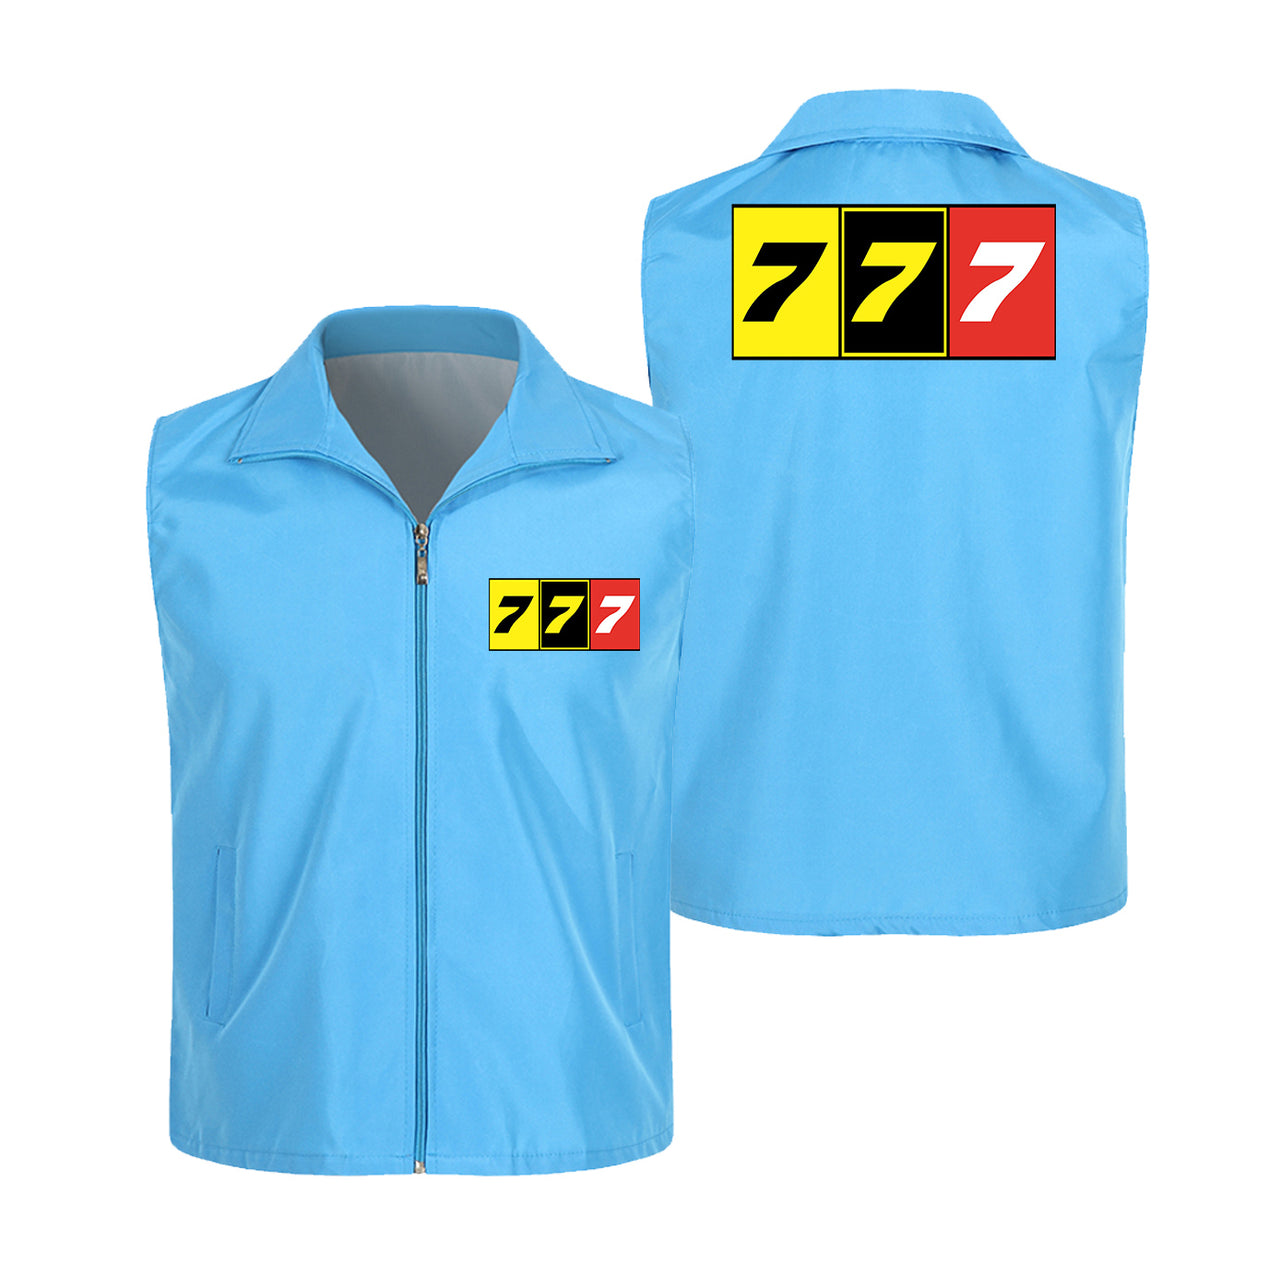 Flat Colourful 777 Designed Thin Style Vests